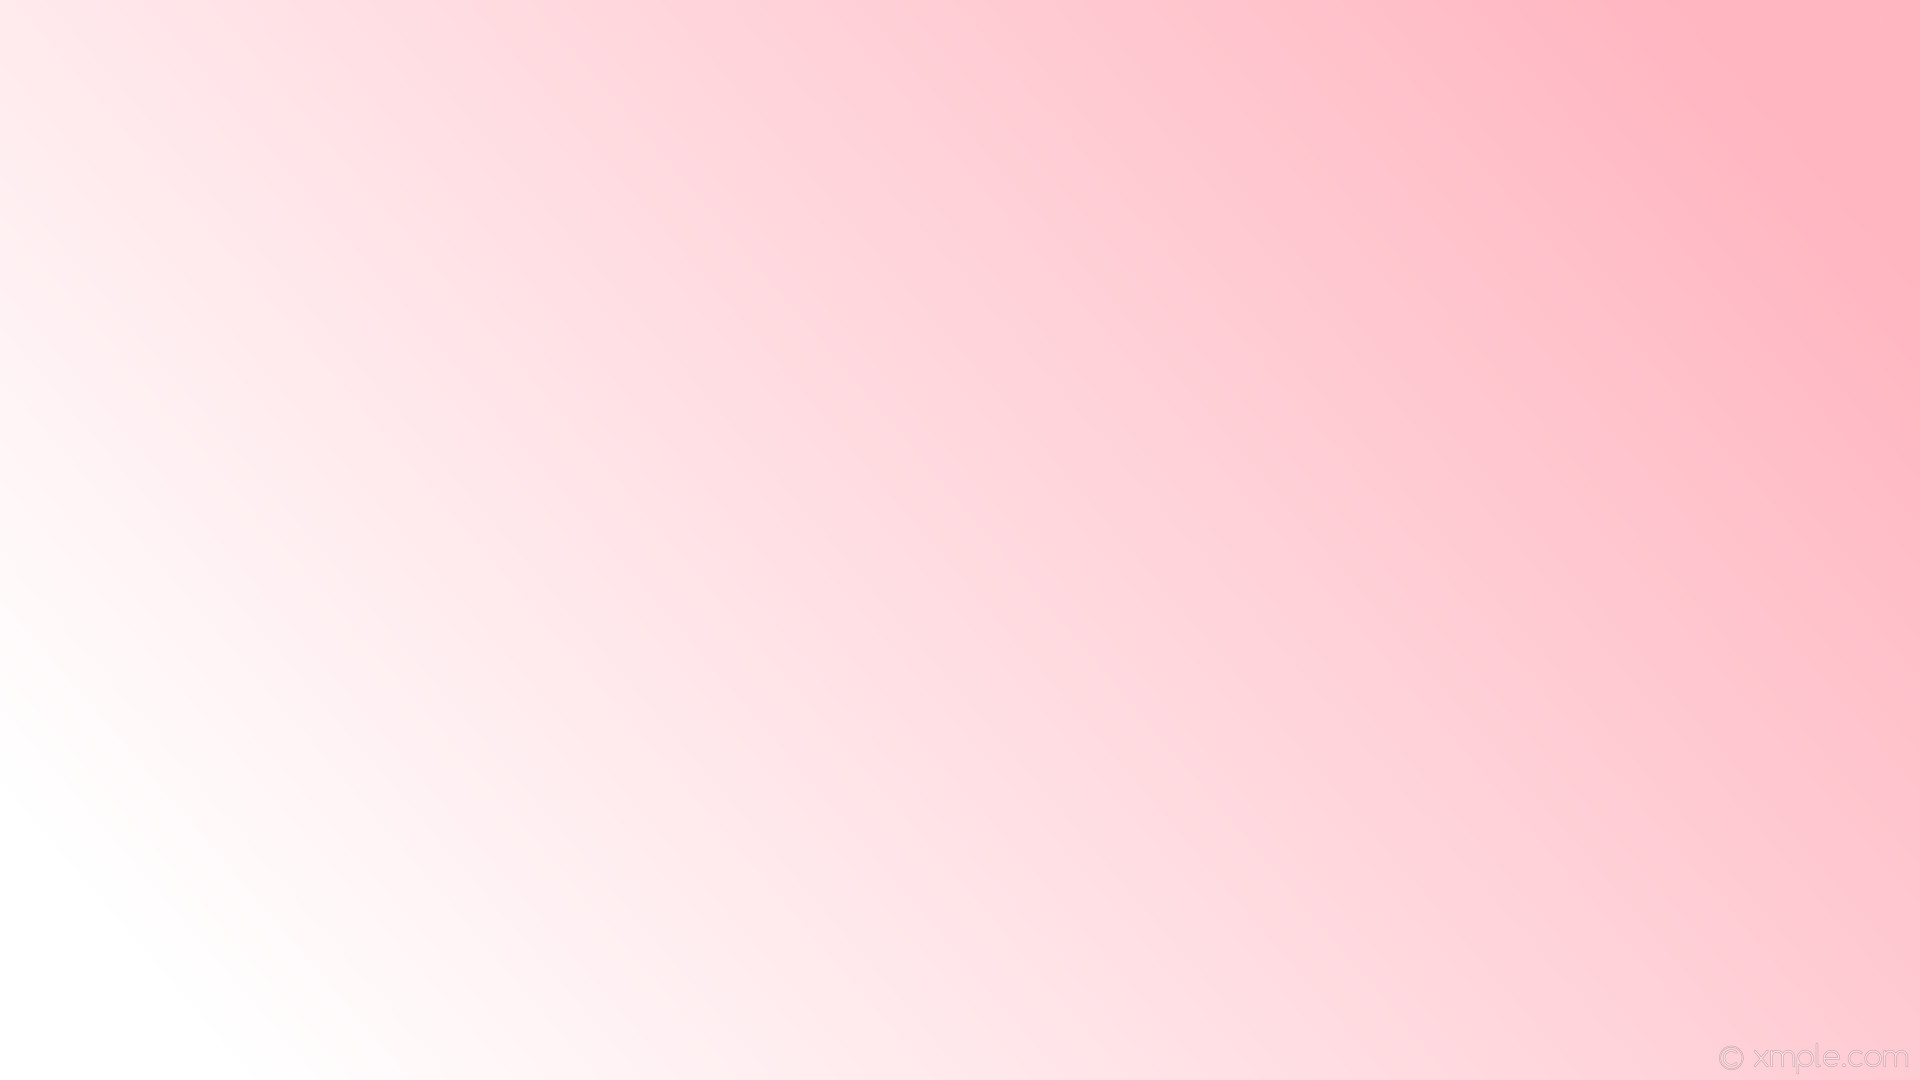 Blue and Pink Hair Gradient Backgrounds - wide 3